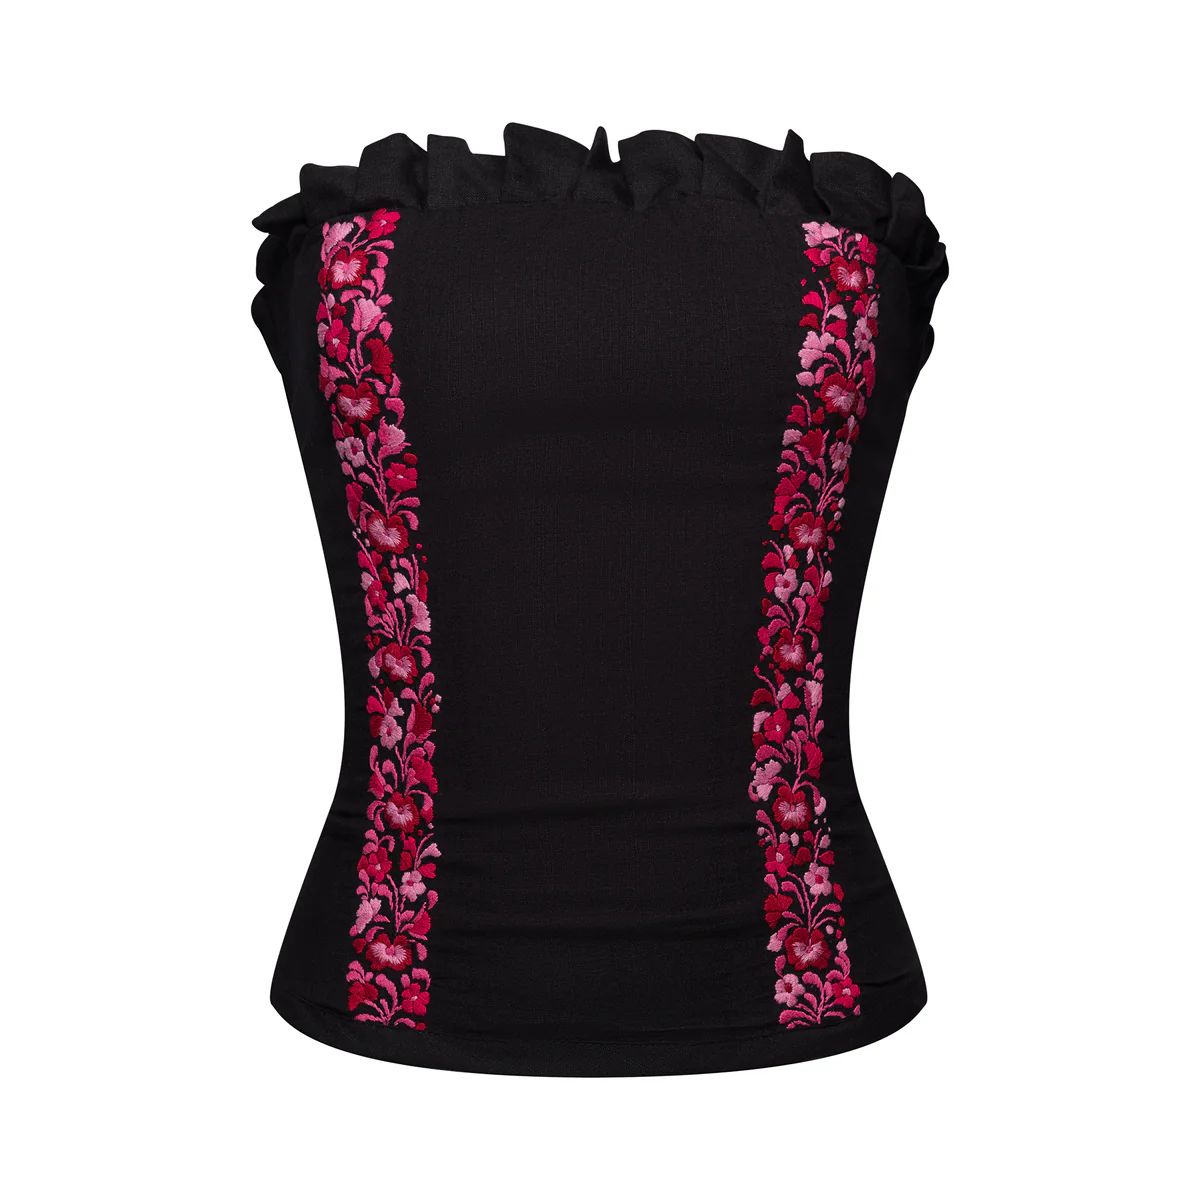 The Cristina Strapless Top in Black with Red and Pink | La Peony Clothing